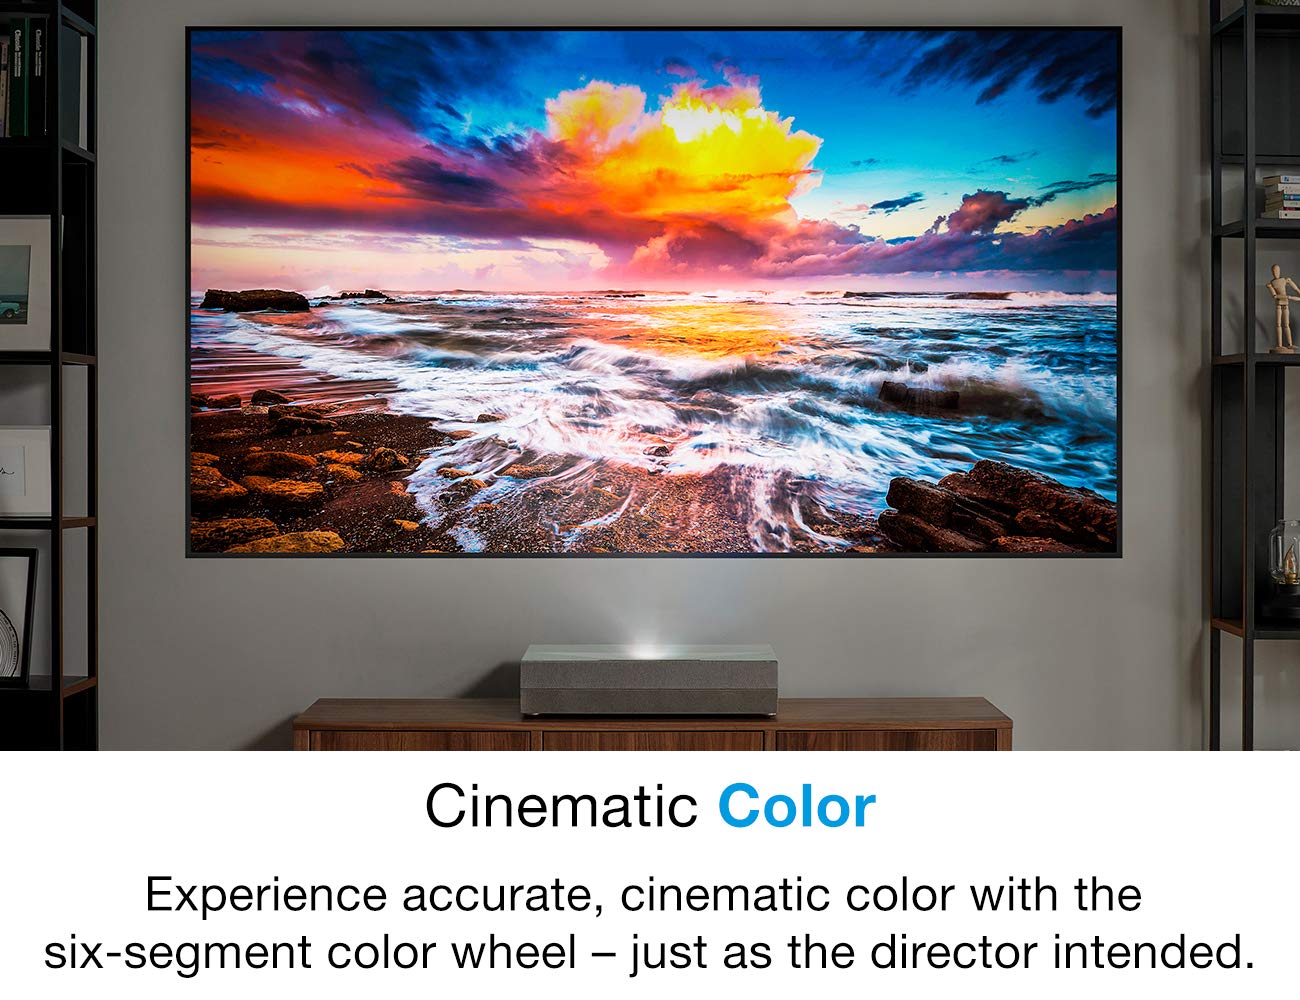 Optoma CinemaX P2 White Smart 4K UHD Laser Projector for Home Theater | 3000 Lumens Superior Image with Laser & 6-Segment Color Wheel | Ultra-Short Throw | Built-In Soundbar | Works w/ Alexa & Google